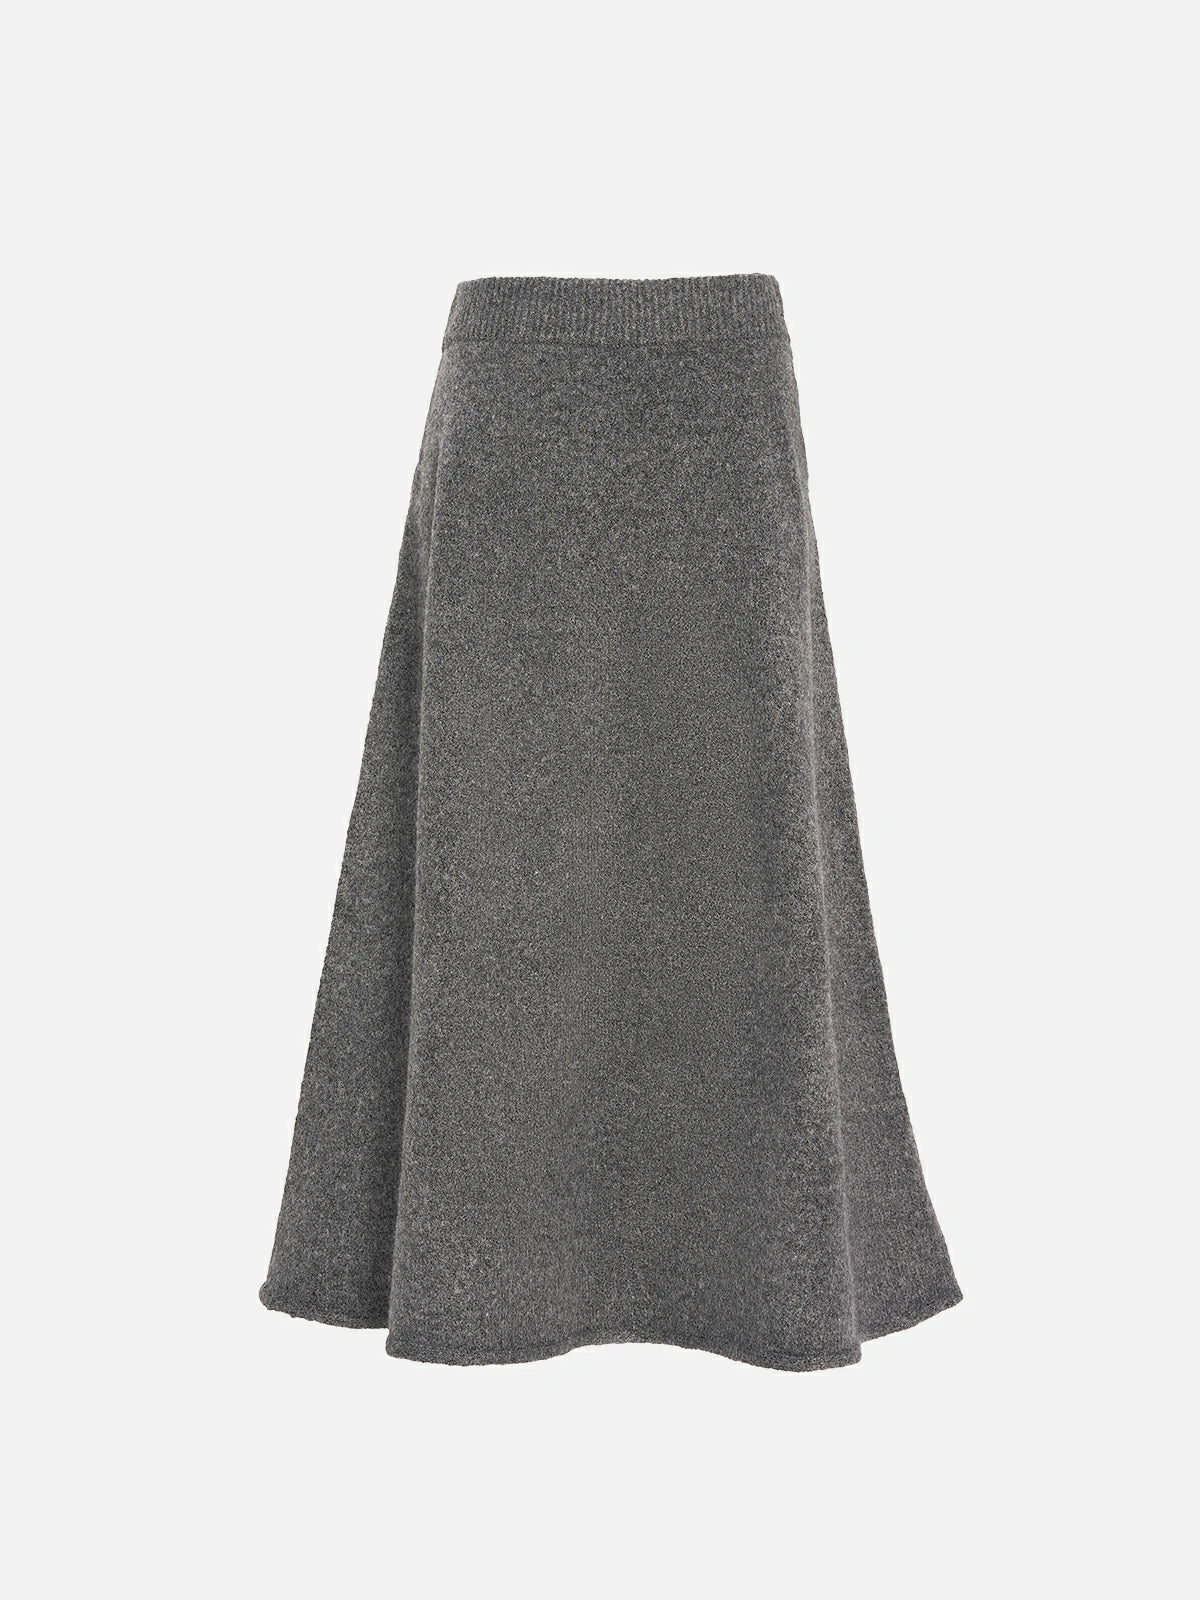 Make a statement in this knitted maxi skirt, featuring an elastic high-waist and A-line silhouette.